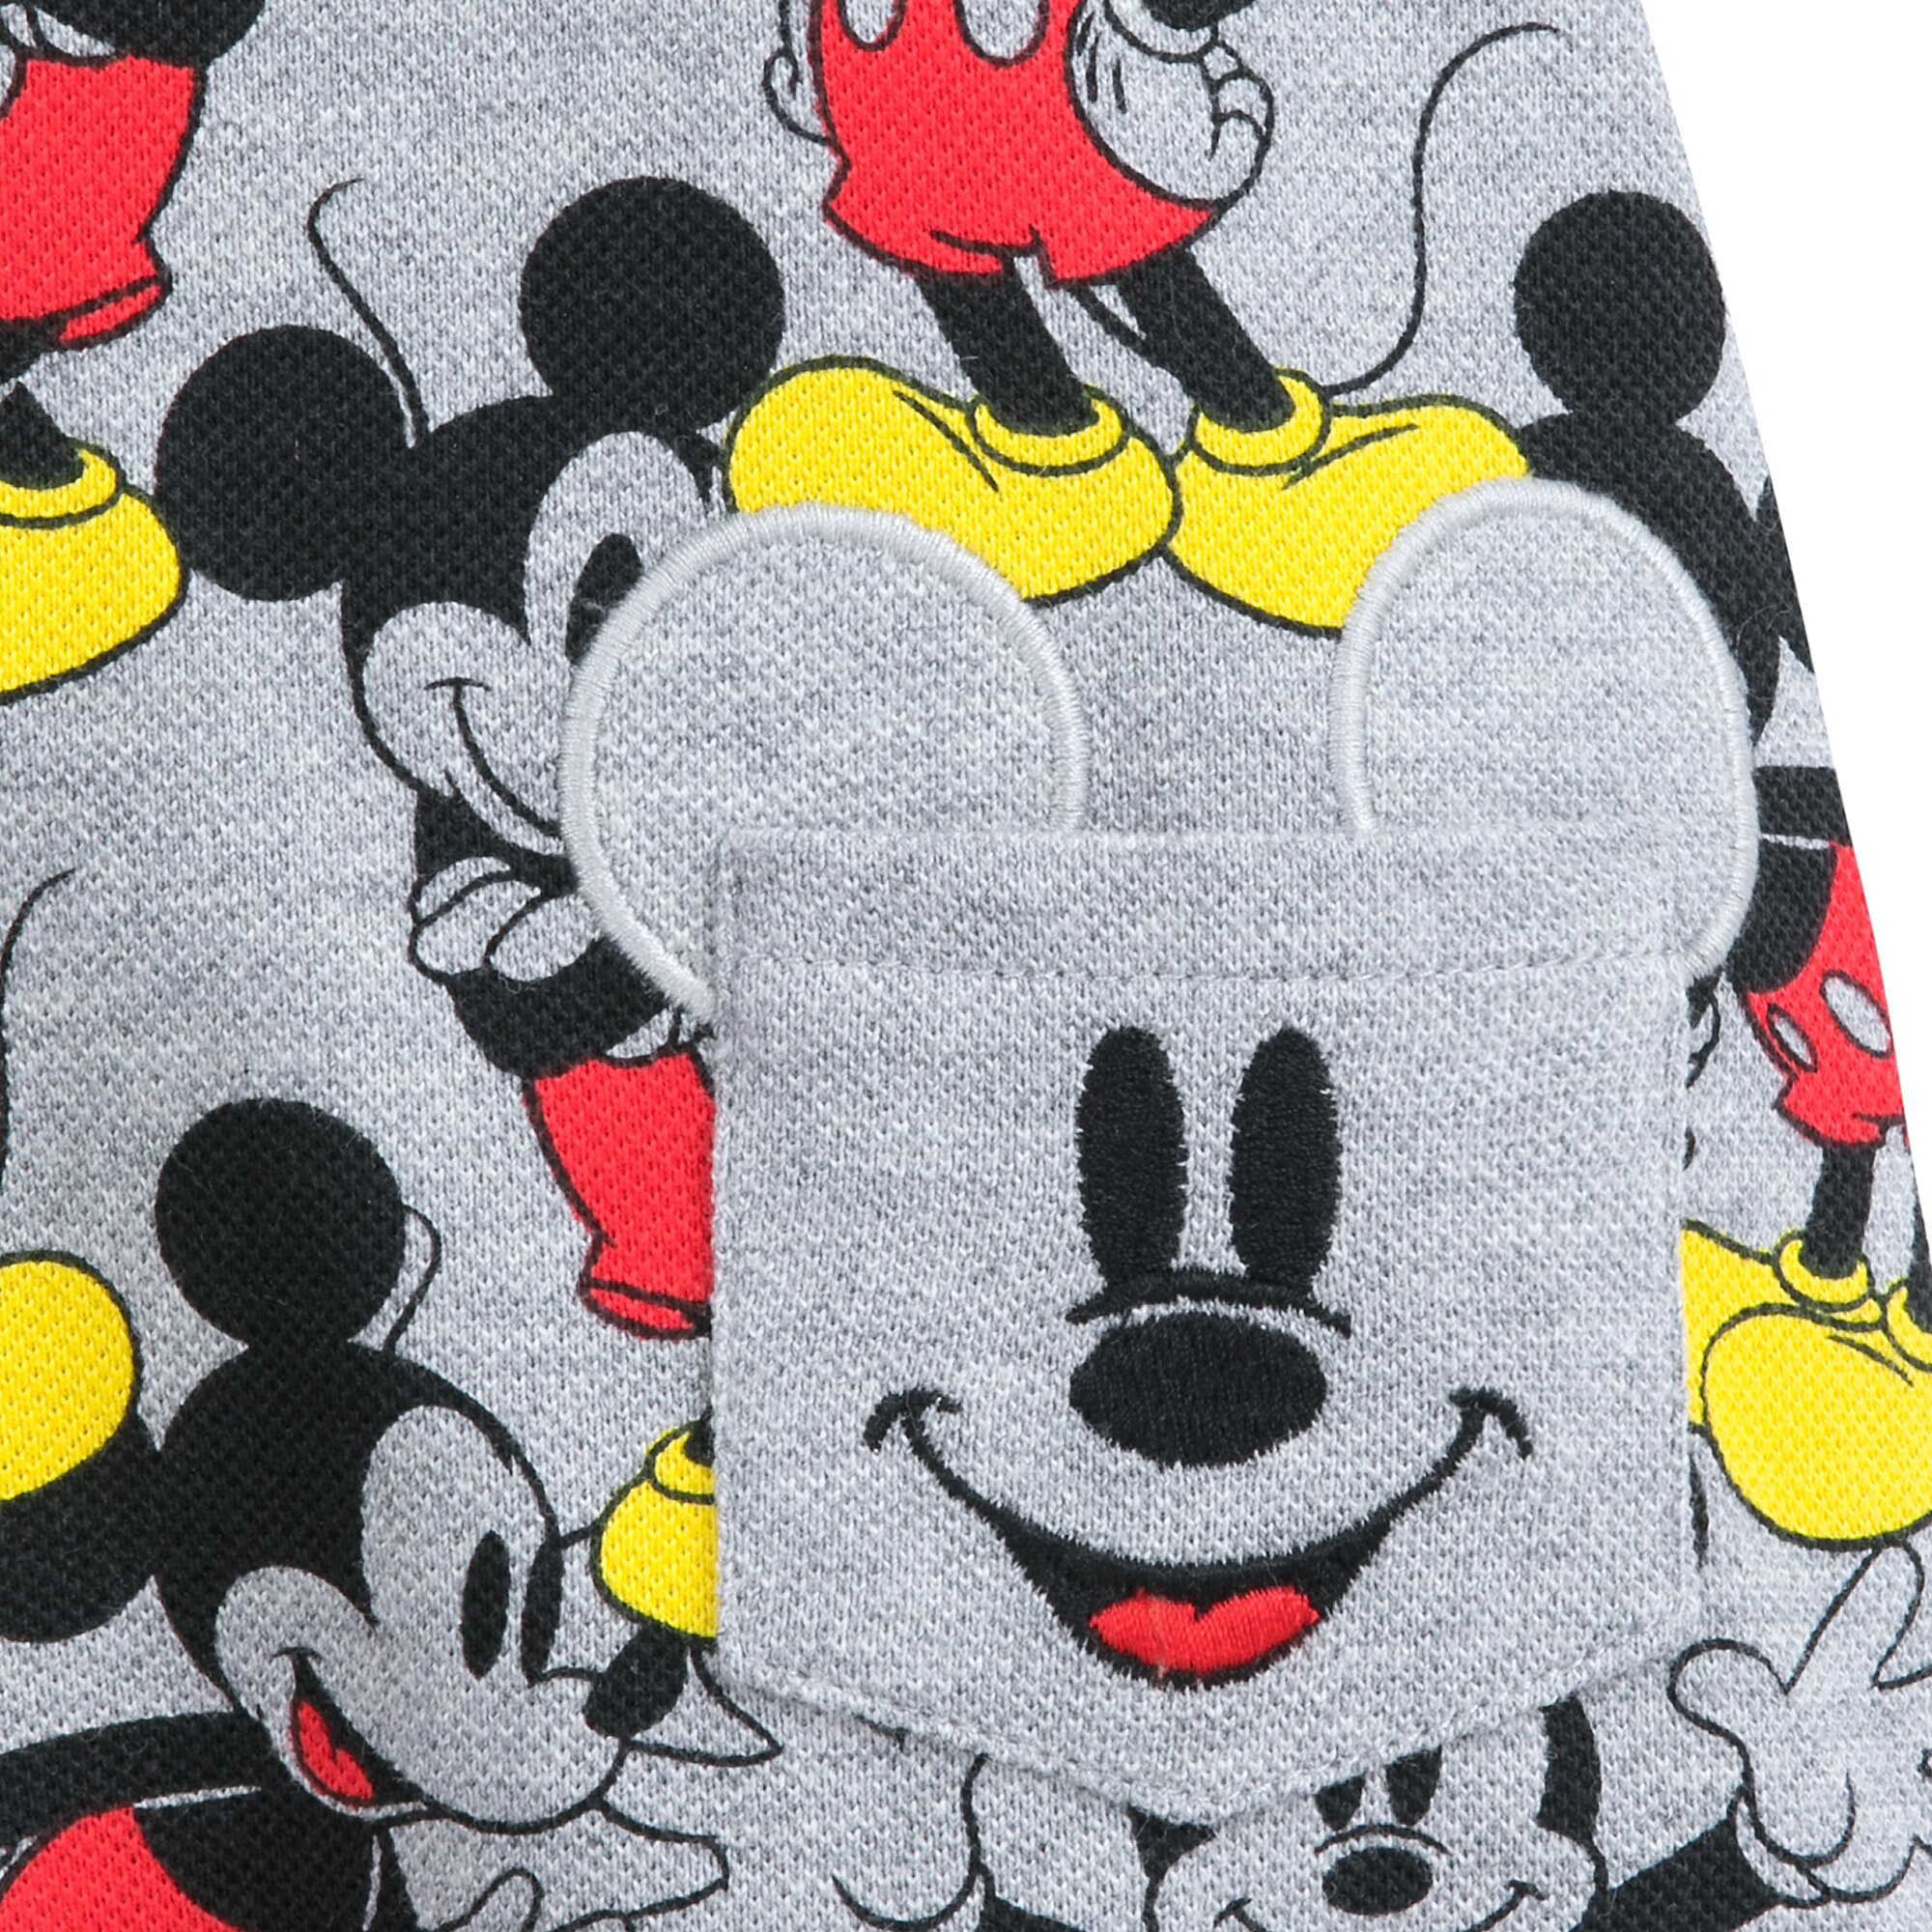 Mickey Mouse Romper for Baby